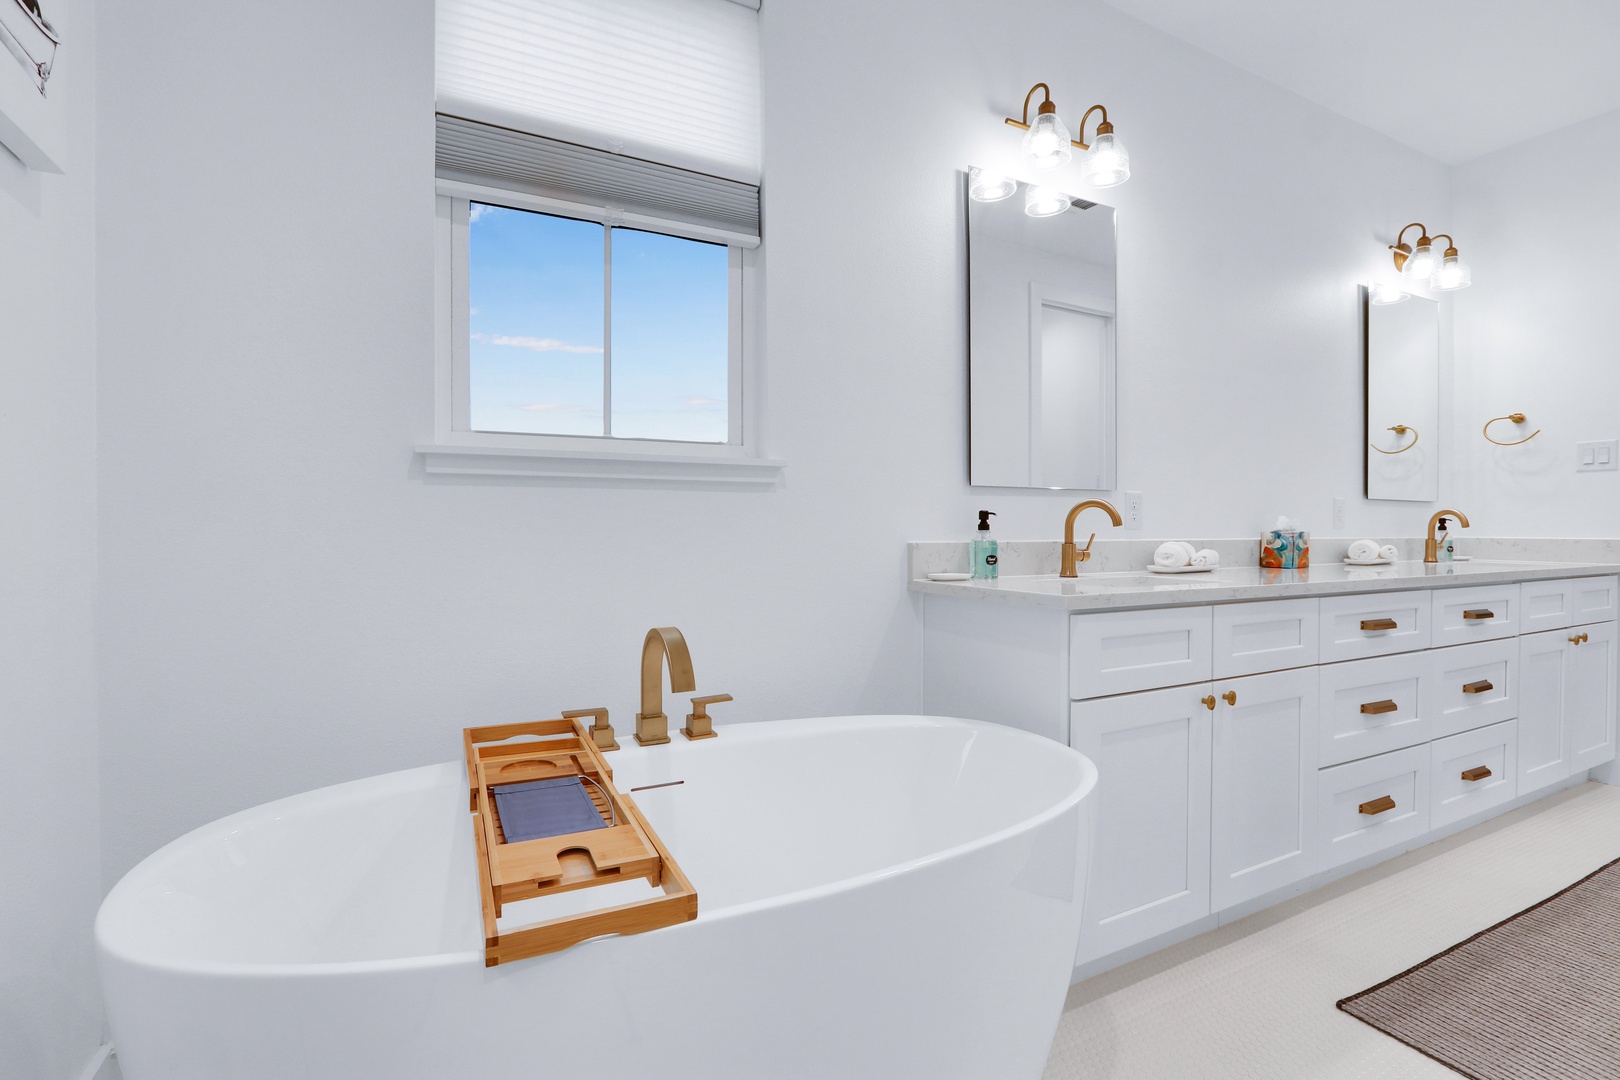 This chic ensuite features dual vanities, glass shower, & luxurious soaking tub